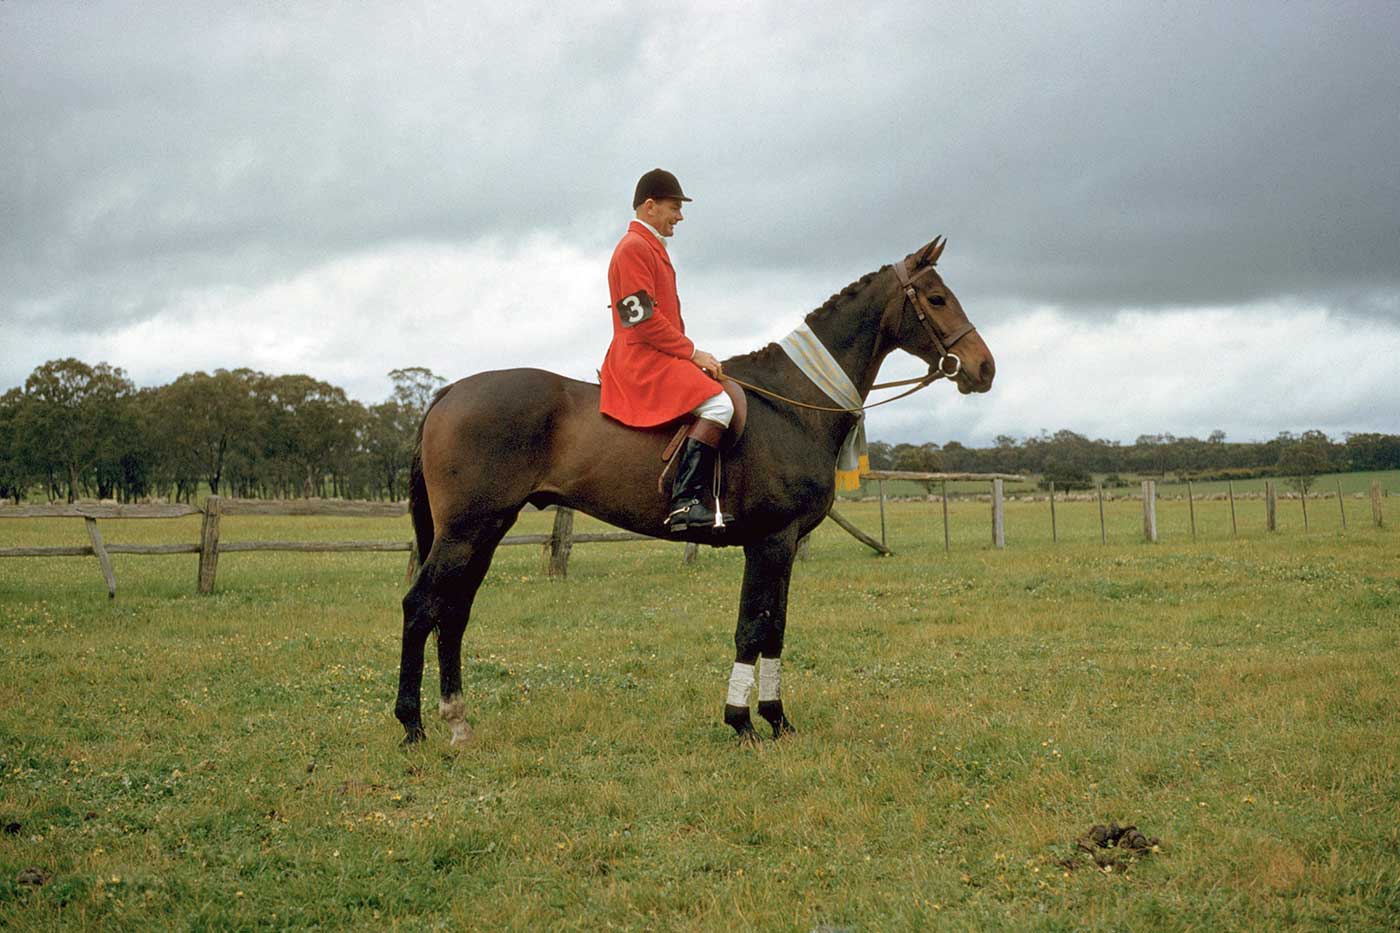 Neale and Mirrabooka, the winning partnership at the one-day event at Great Auclum International, in Berkshire, England, 1960. - click to view larger image